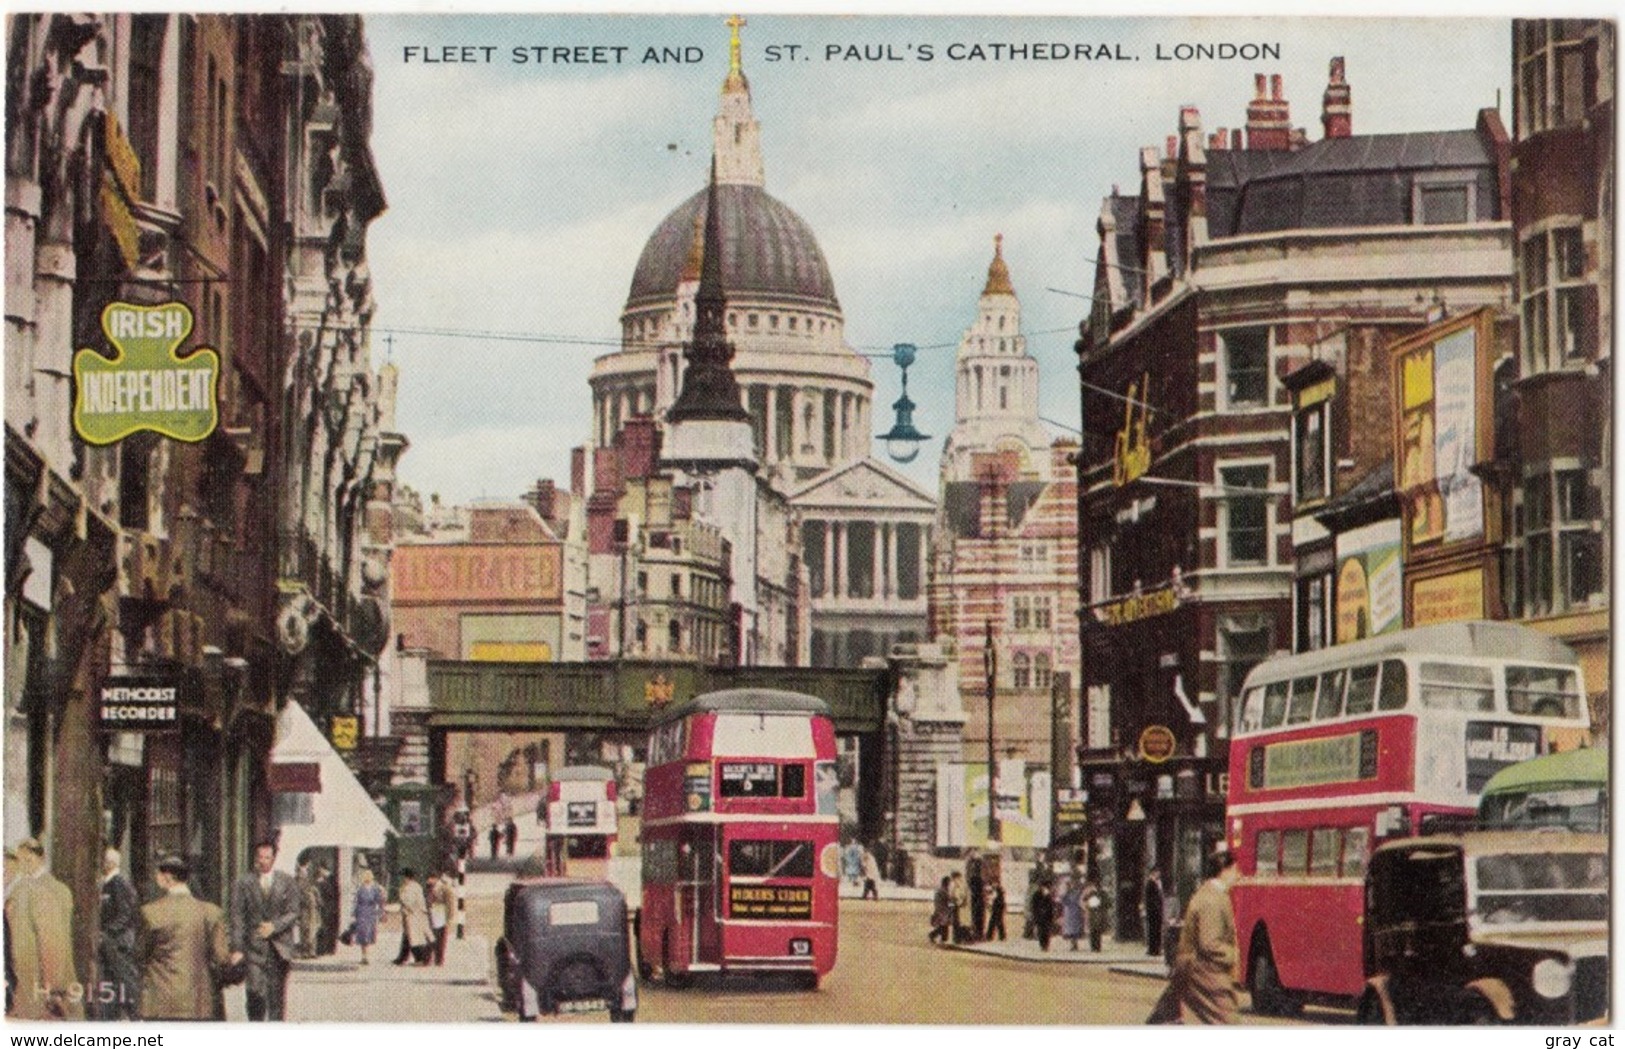 FLEET STREET AND ST. PAUL'S CATHEDRAL, LONDON, Unused Postcard [21596] - St. Paul's Cathedral